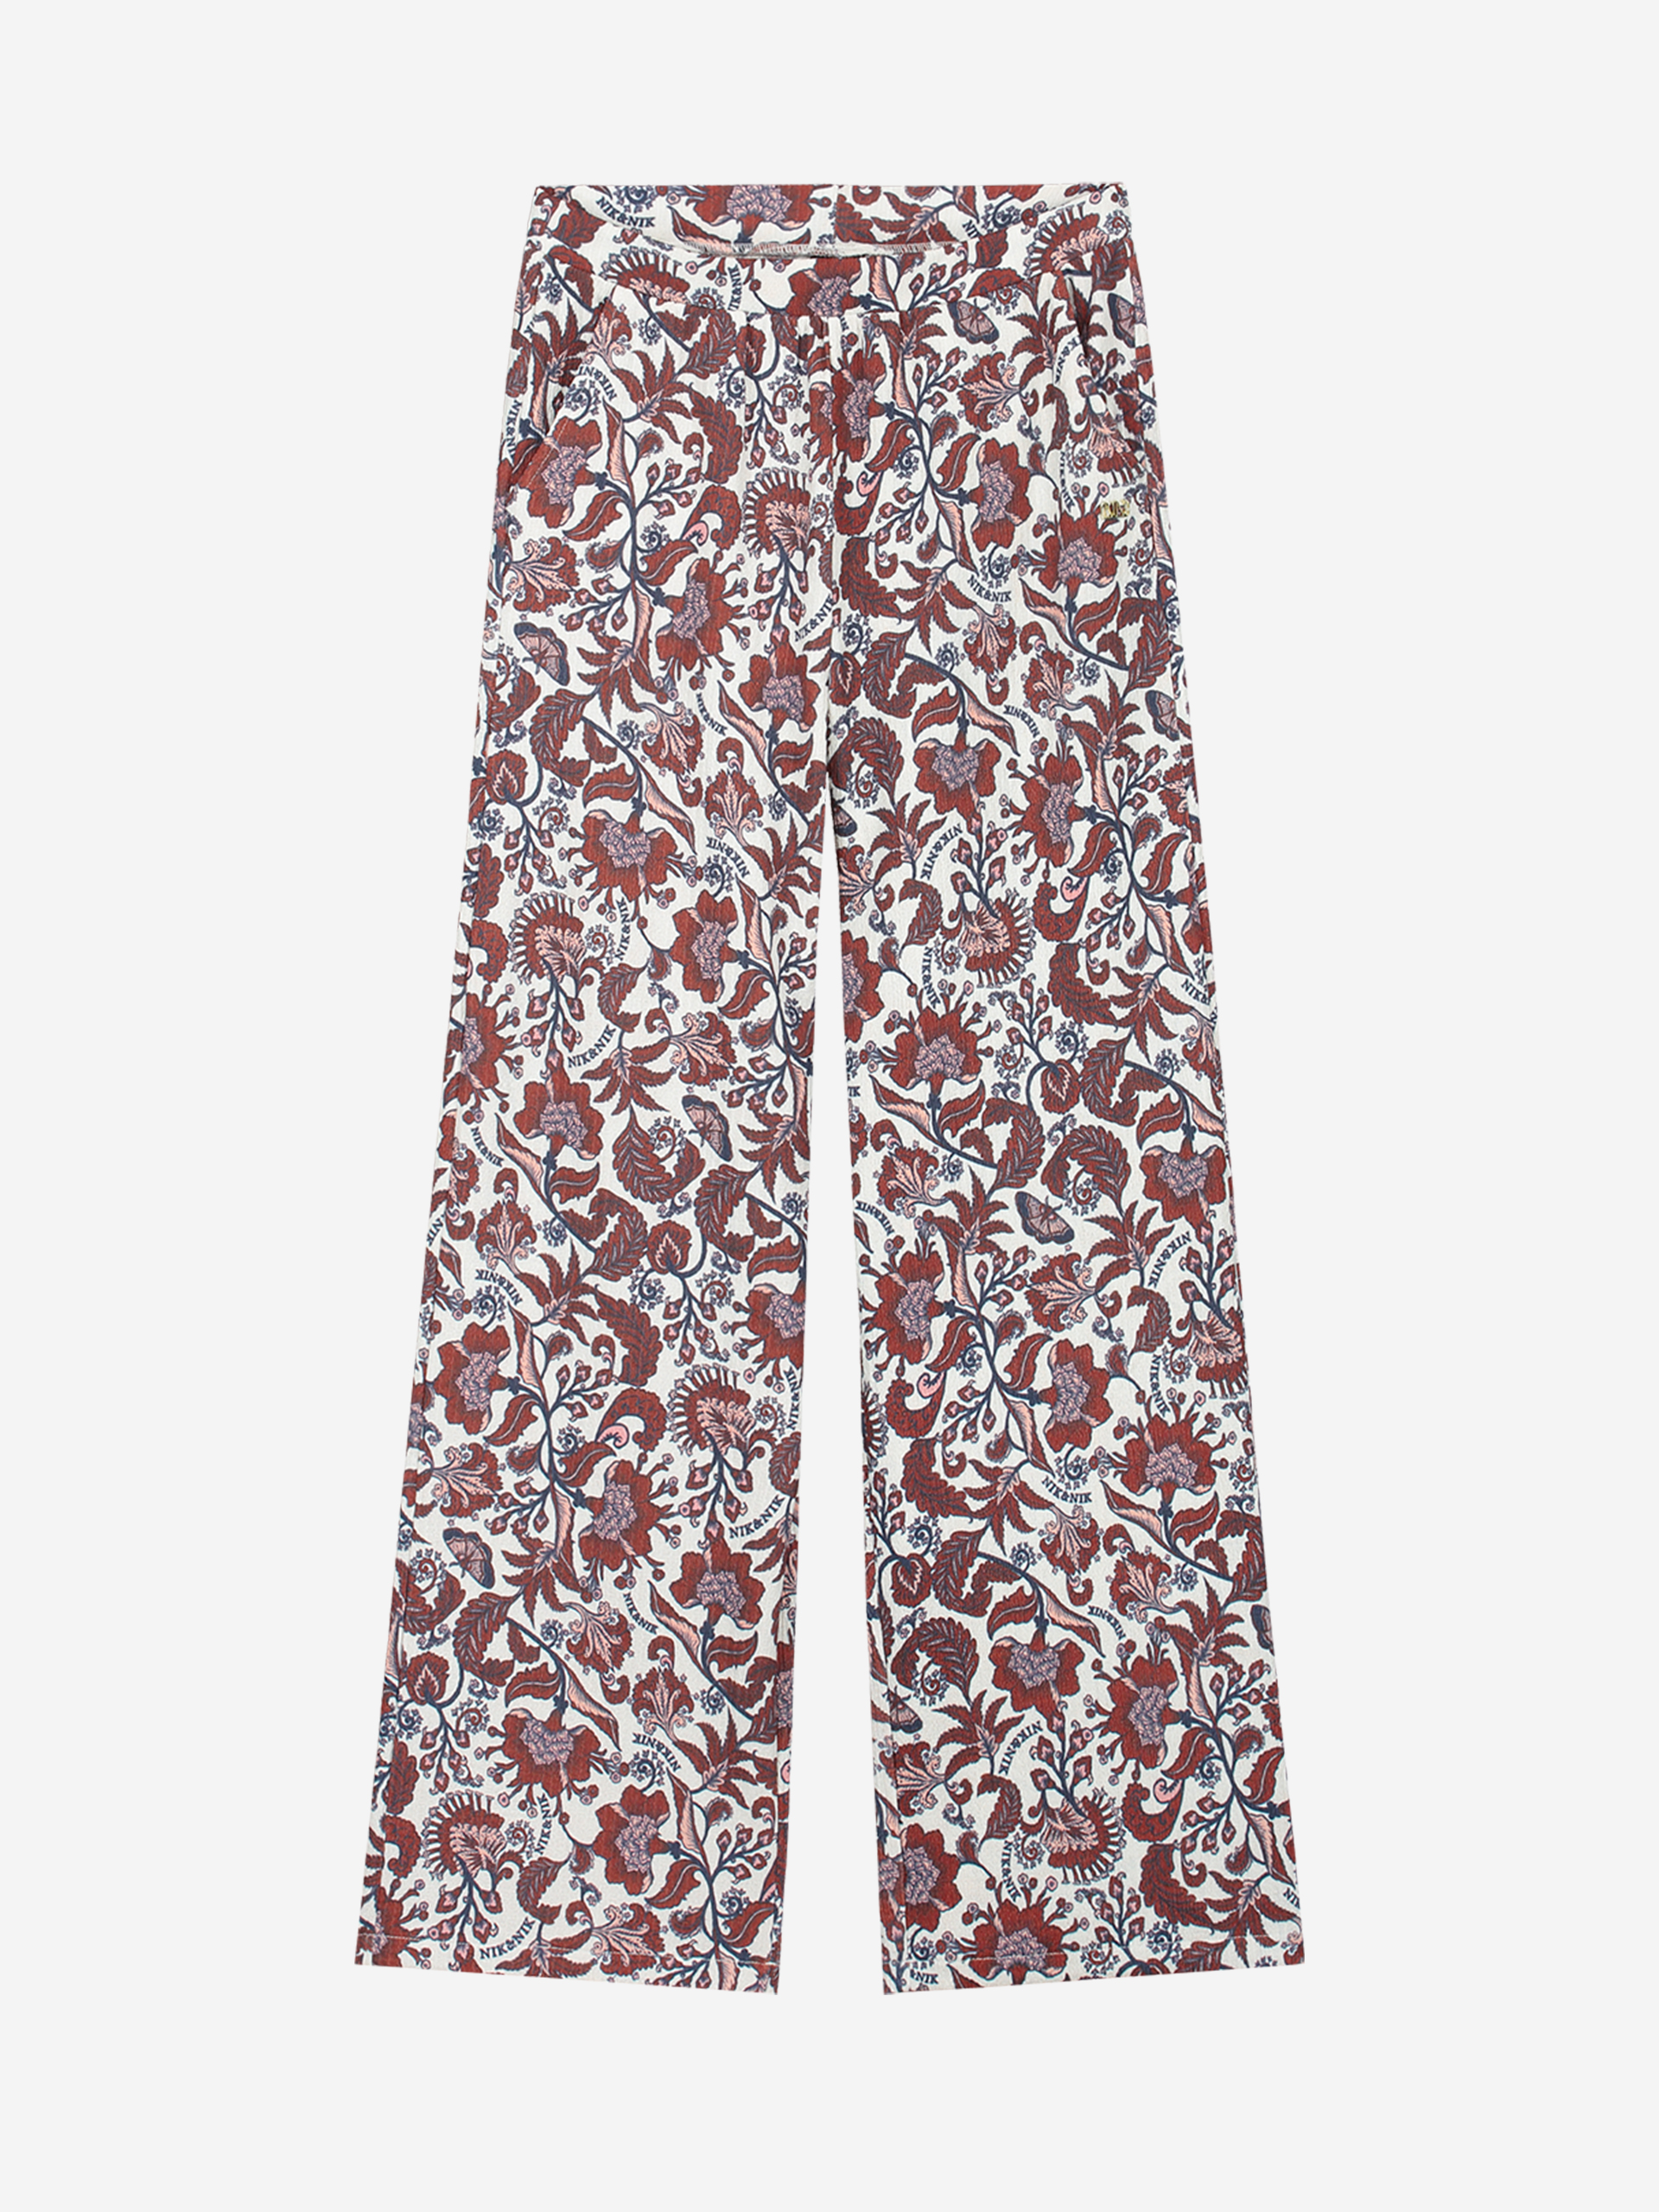 Regular pants with mid rise 